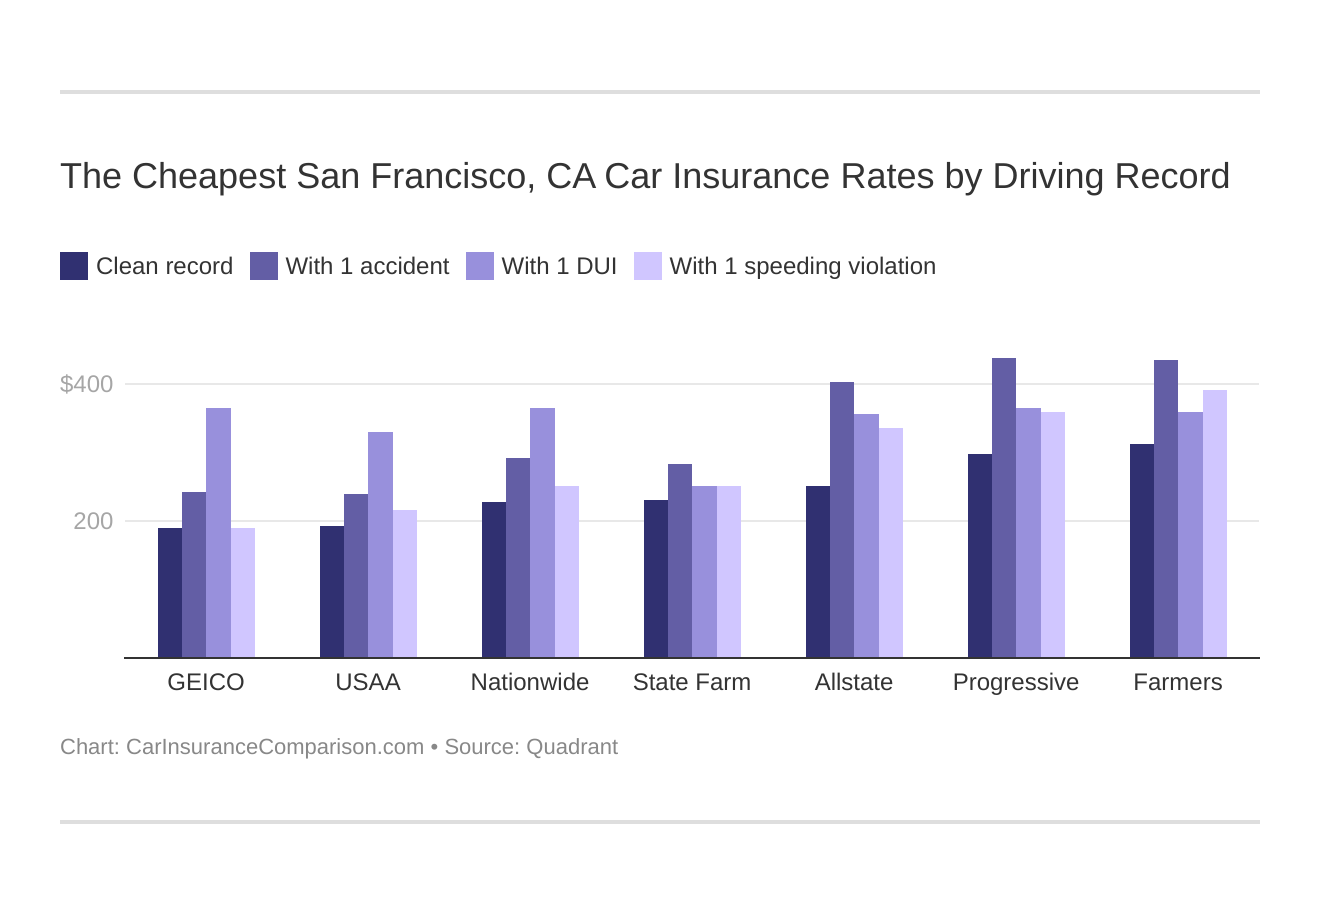 The Cheapest San Francisco, CA Car Insurance Rates by Driving Record